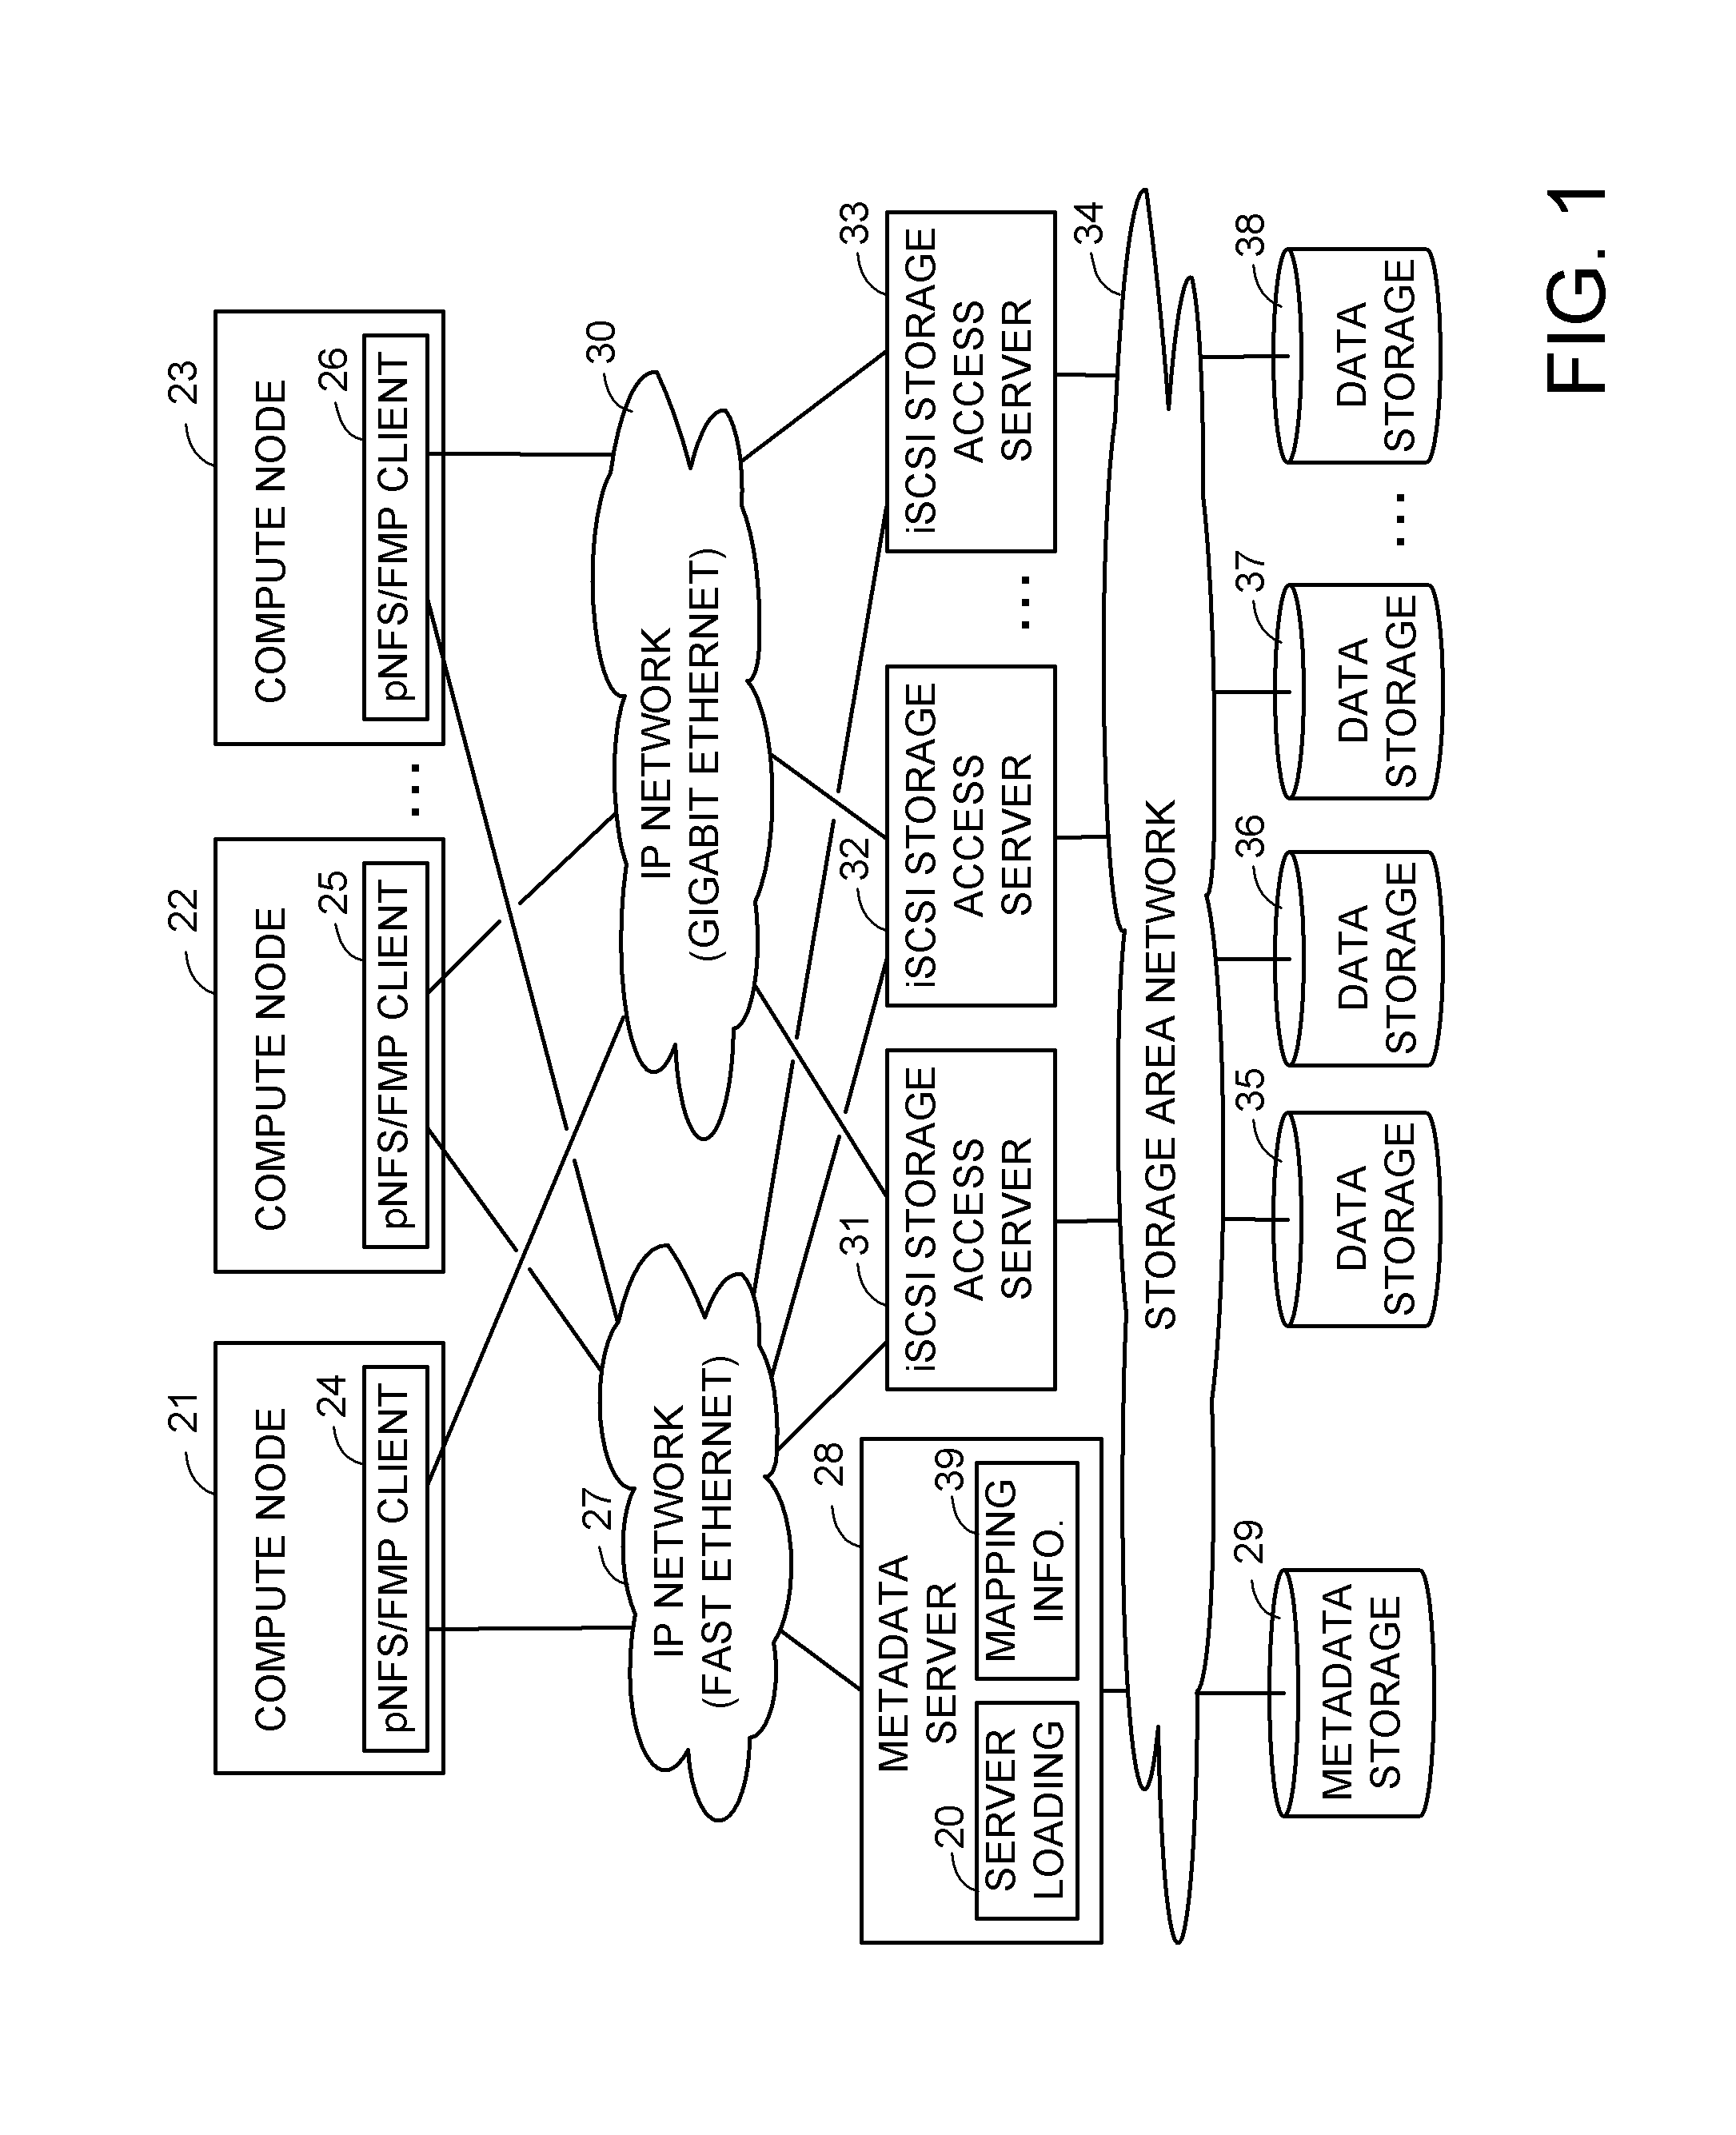 Asymmetric data storage system for high performance and grid computing